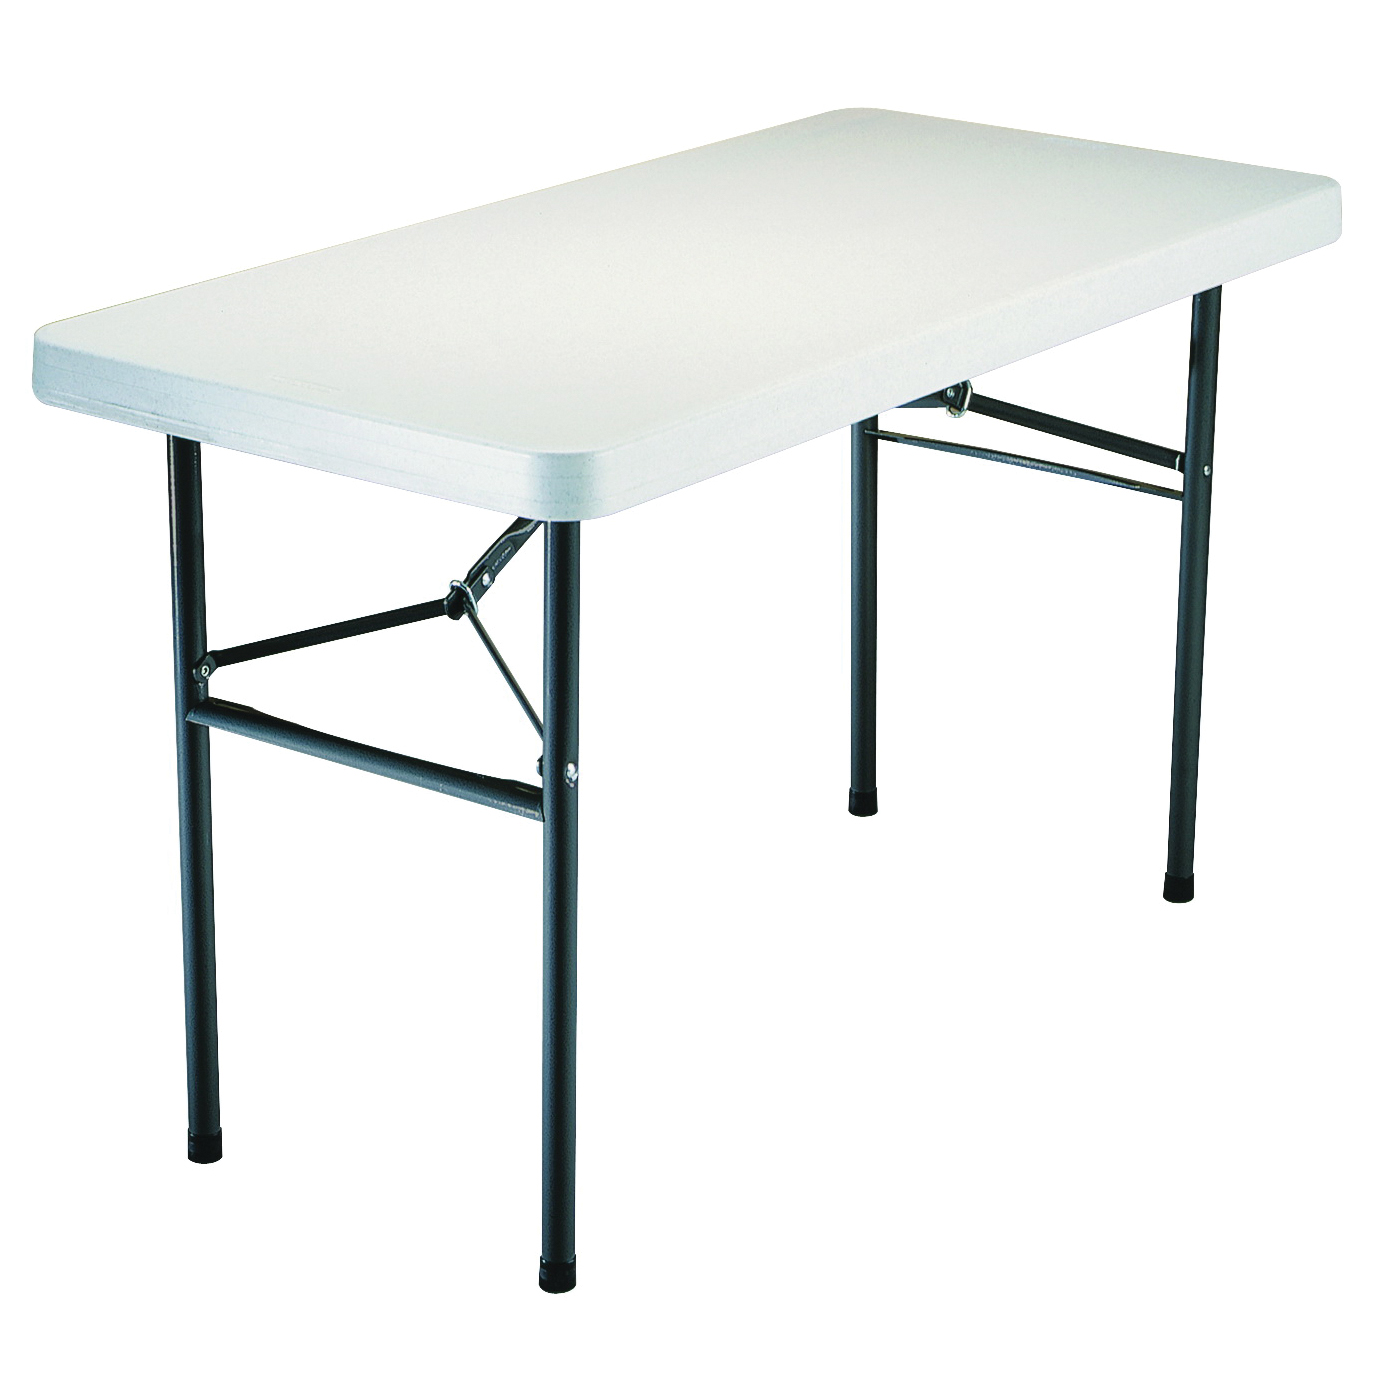 Lifetime Products 2940 Folding Table, Steel Frame, Polyethylene Tabletop, Gray/White - 1